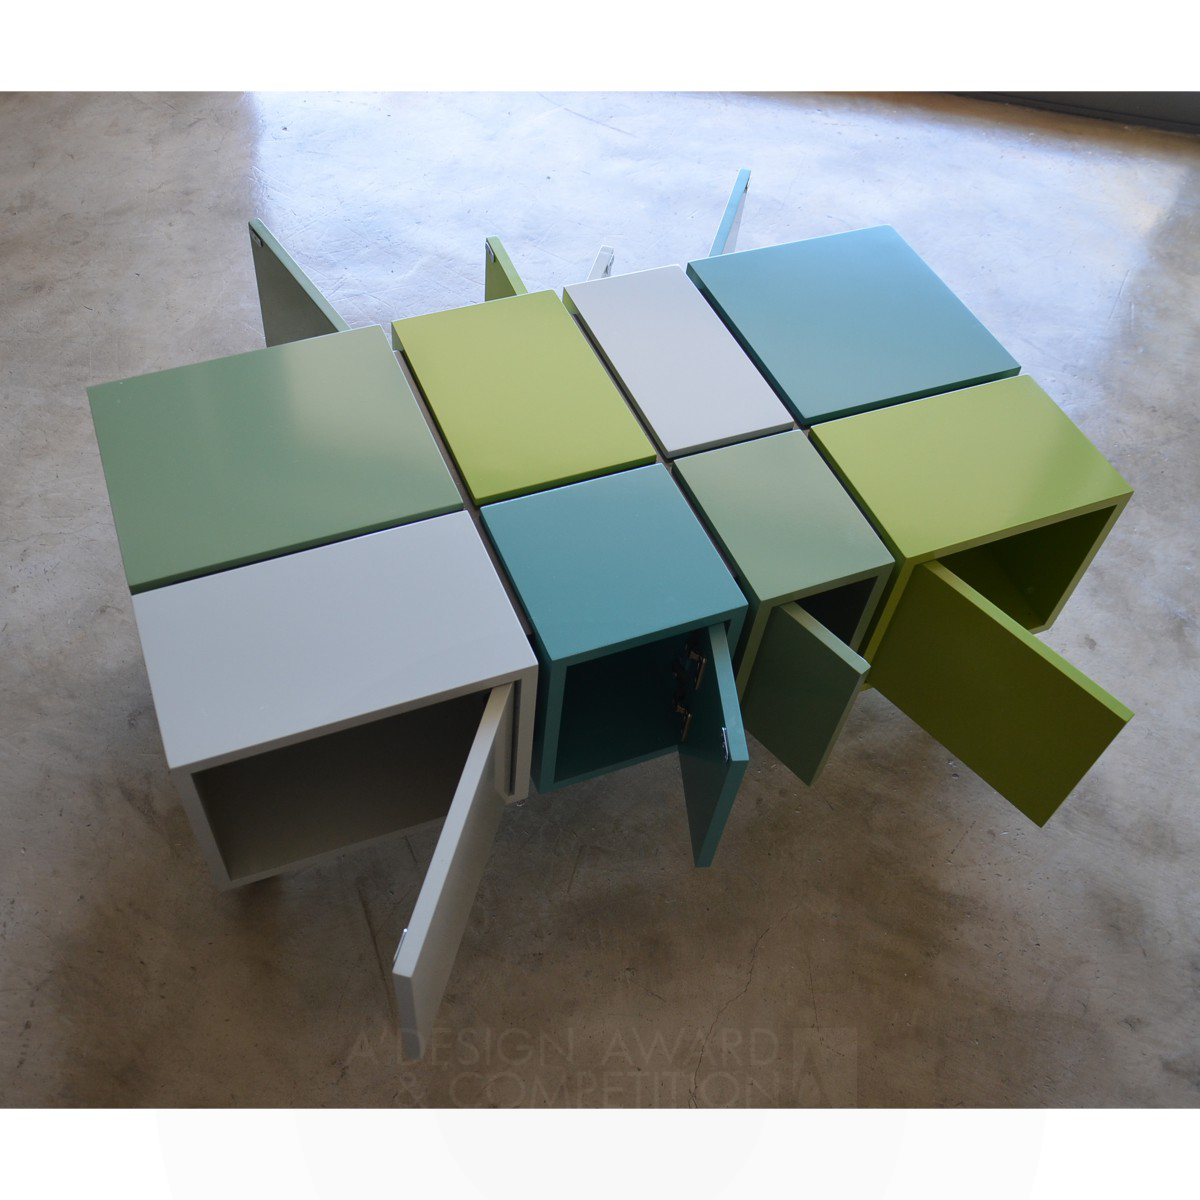 Cell coffee table by Anna Moraitou